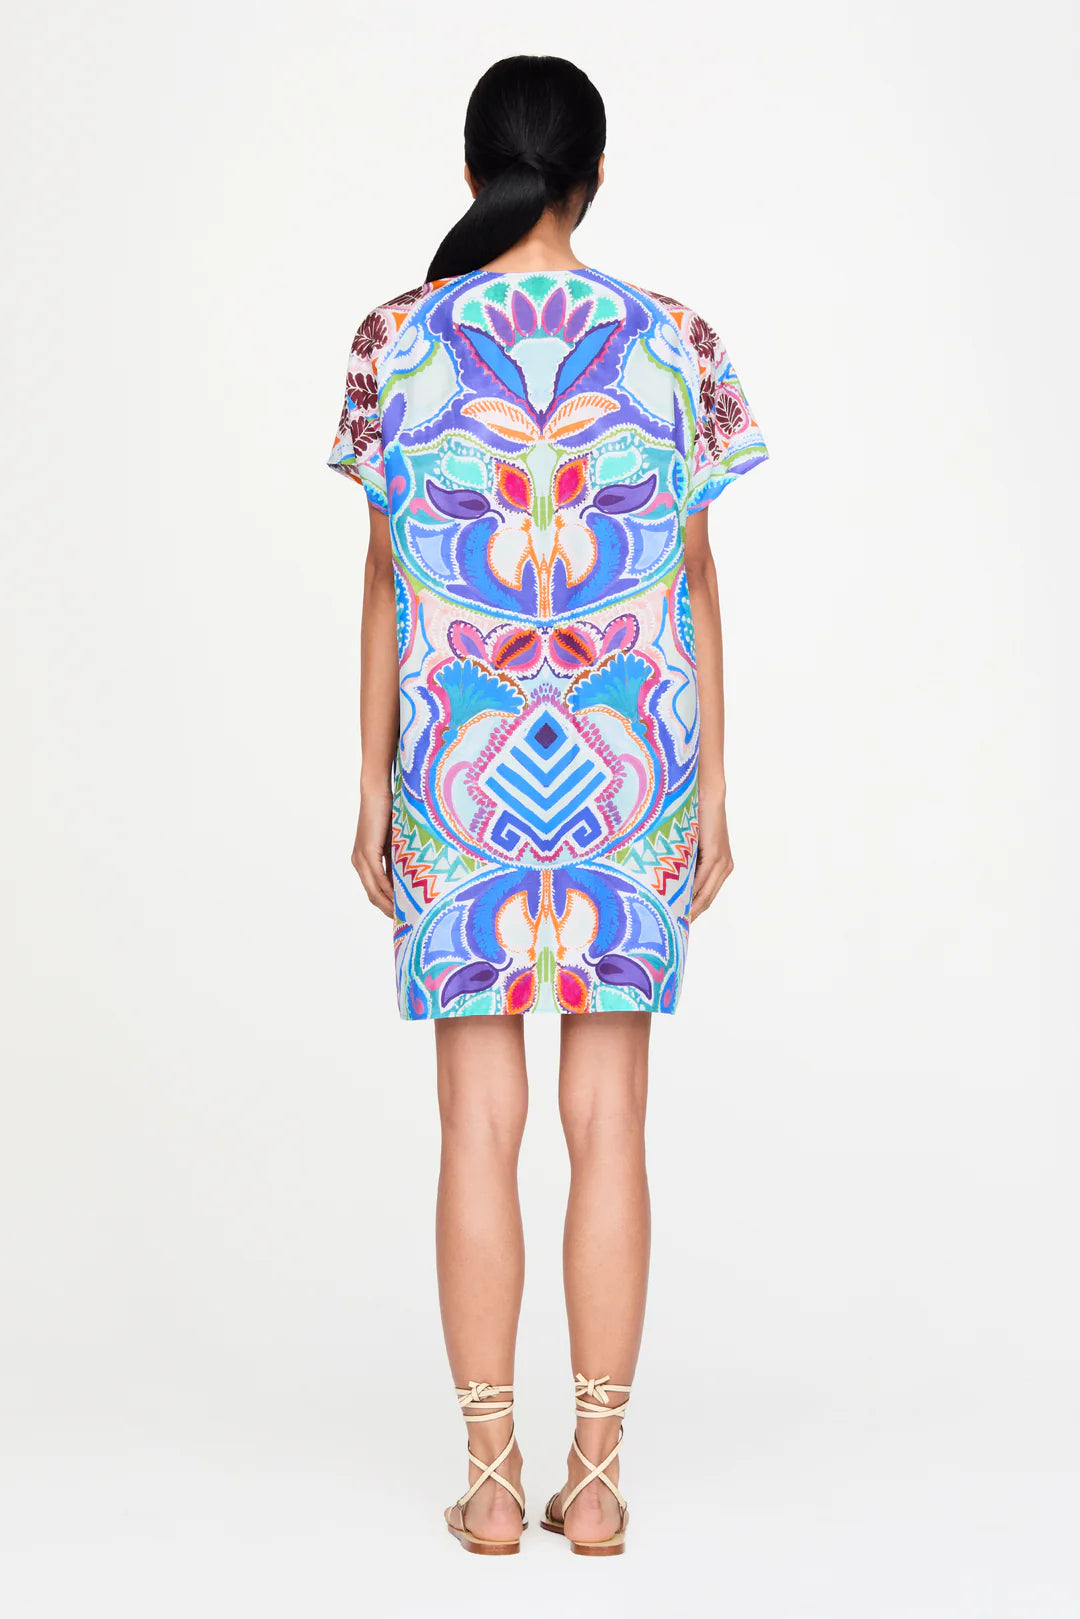 Ollie Dress by Marie Oliver in Morpho